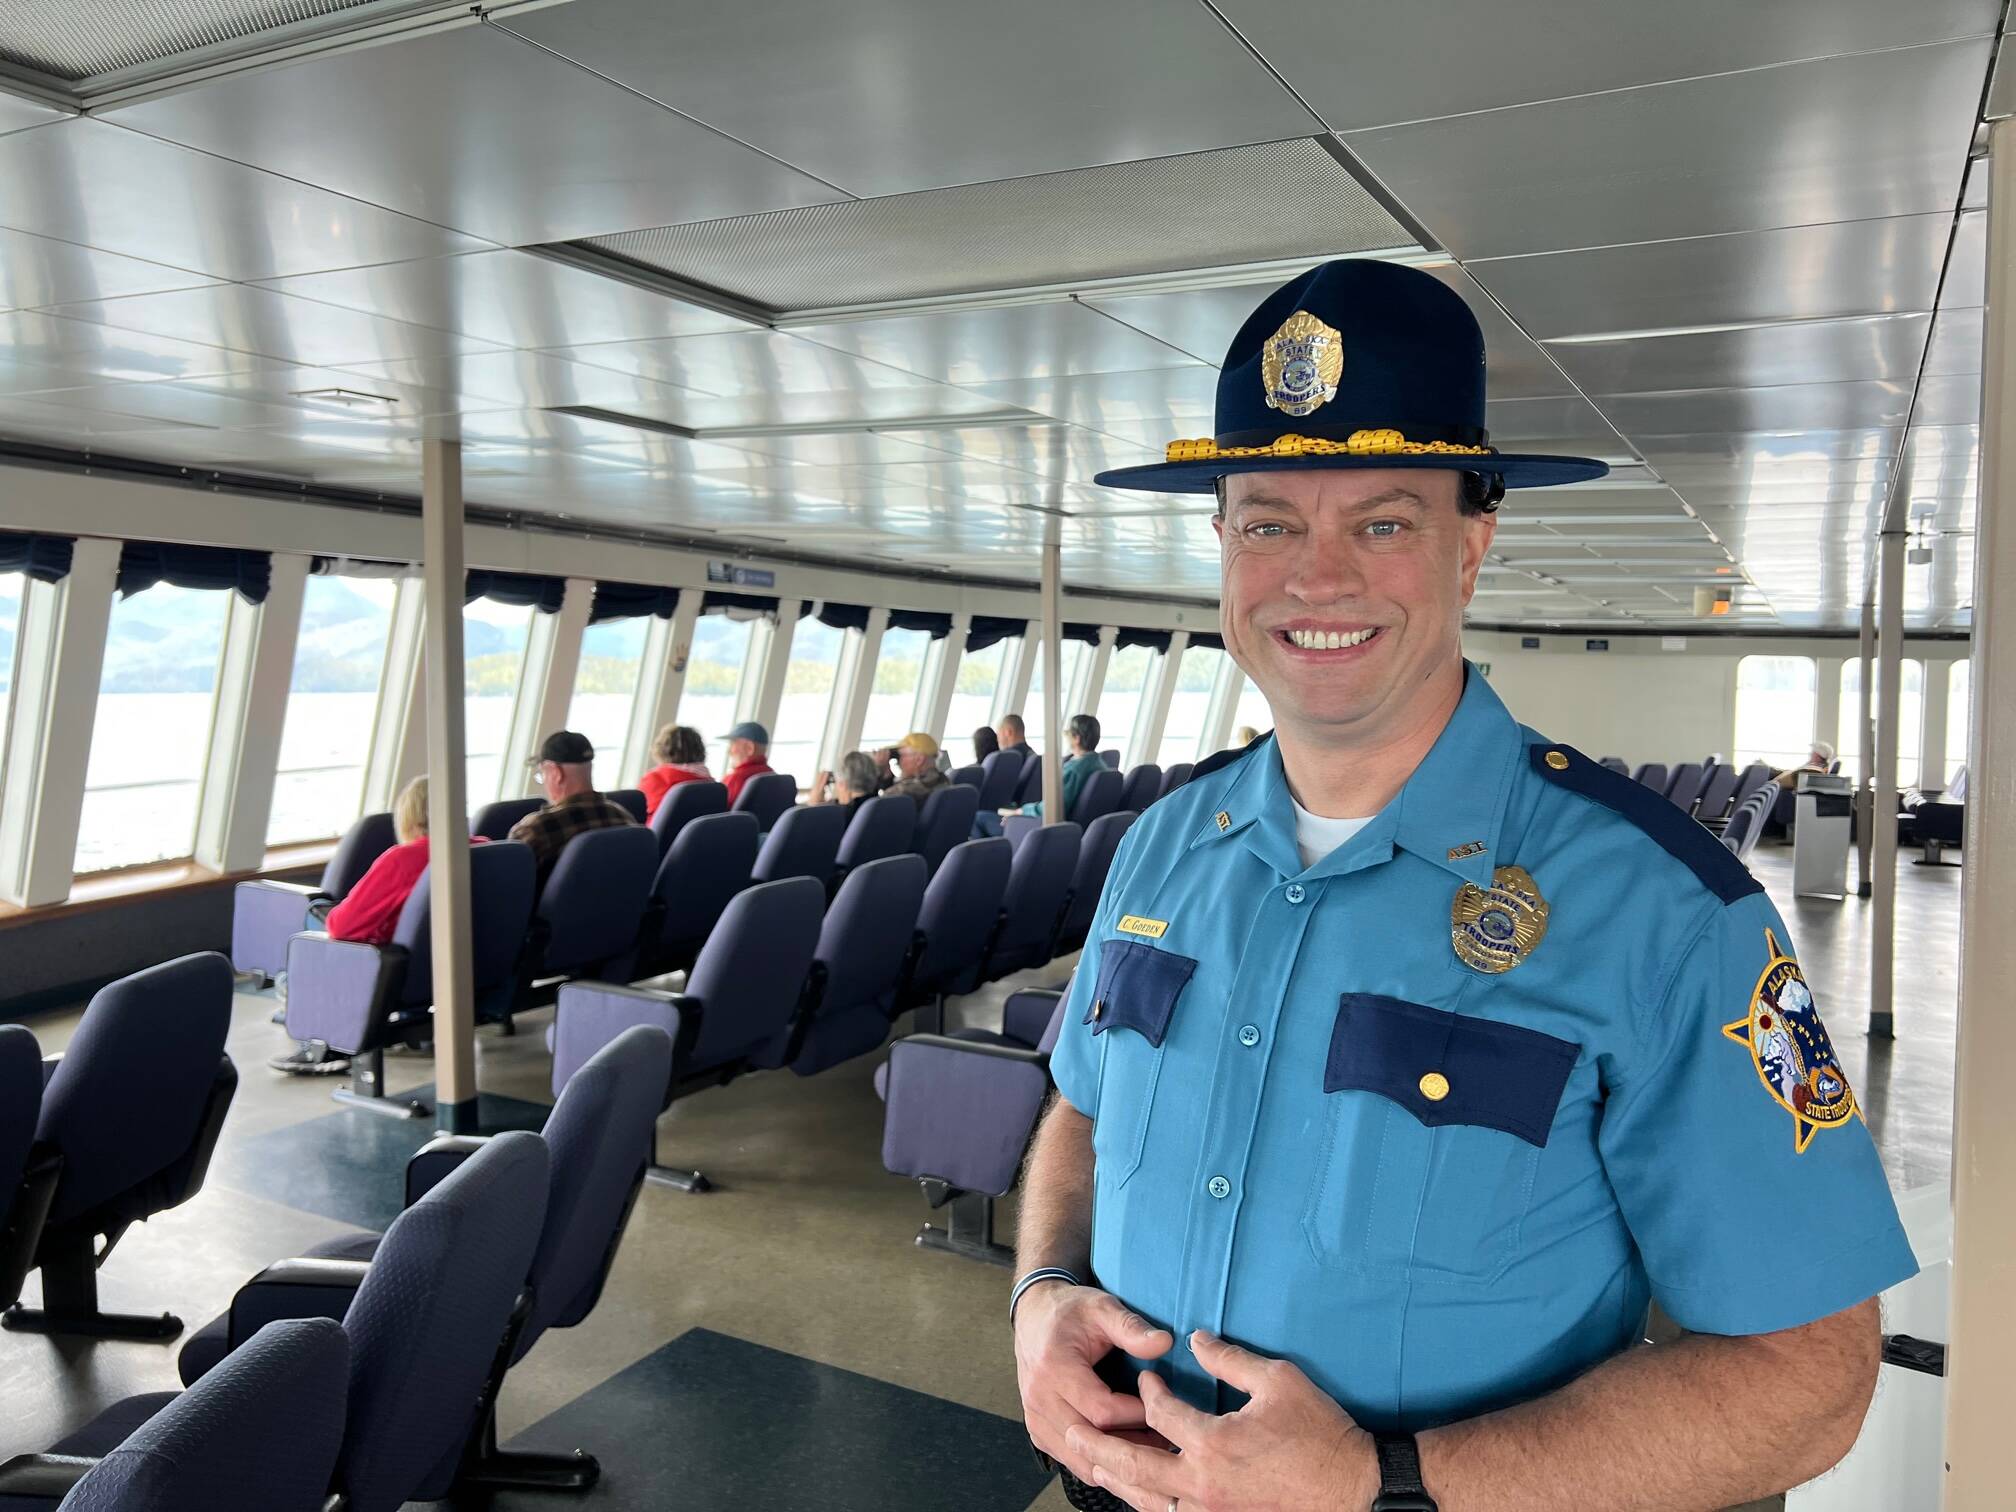 Chad Goeden, seen here on board the Columbia in mid-July, is one of two retired Alaska State Troopers participating in a new program that serves as deterrent while also strengthening security on the Alaska Marine Highway System. (Meredith Jordan / Juneau Empire)